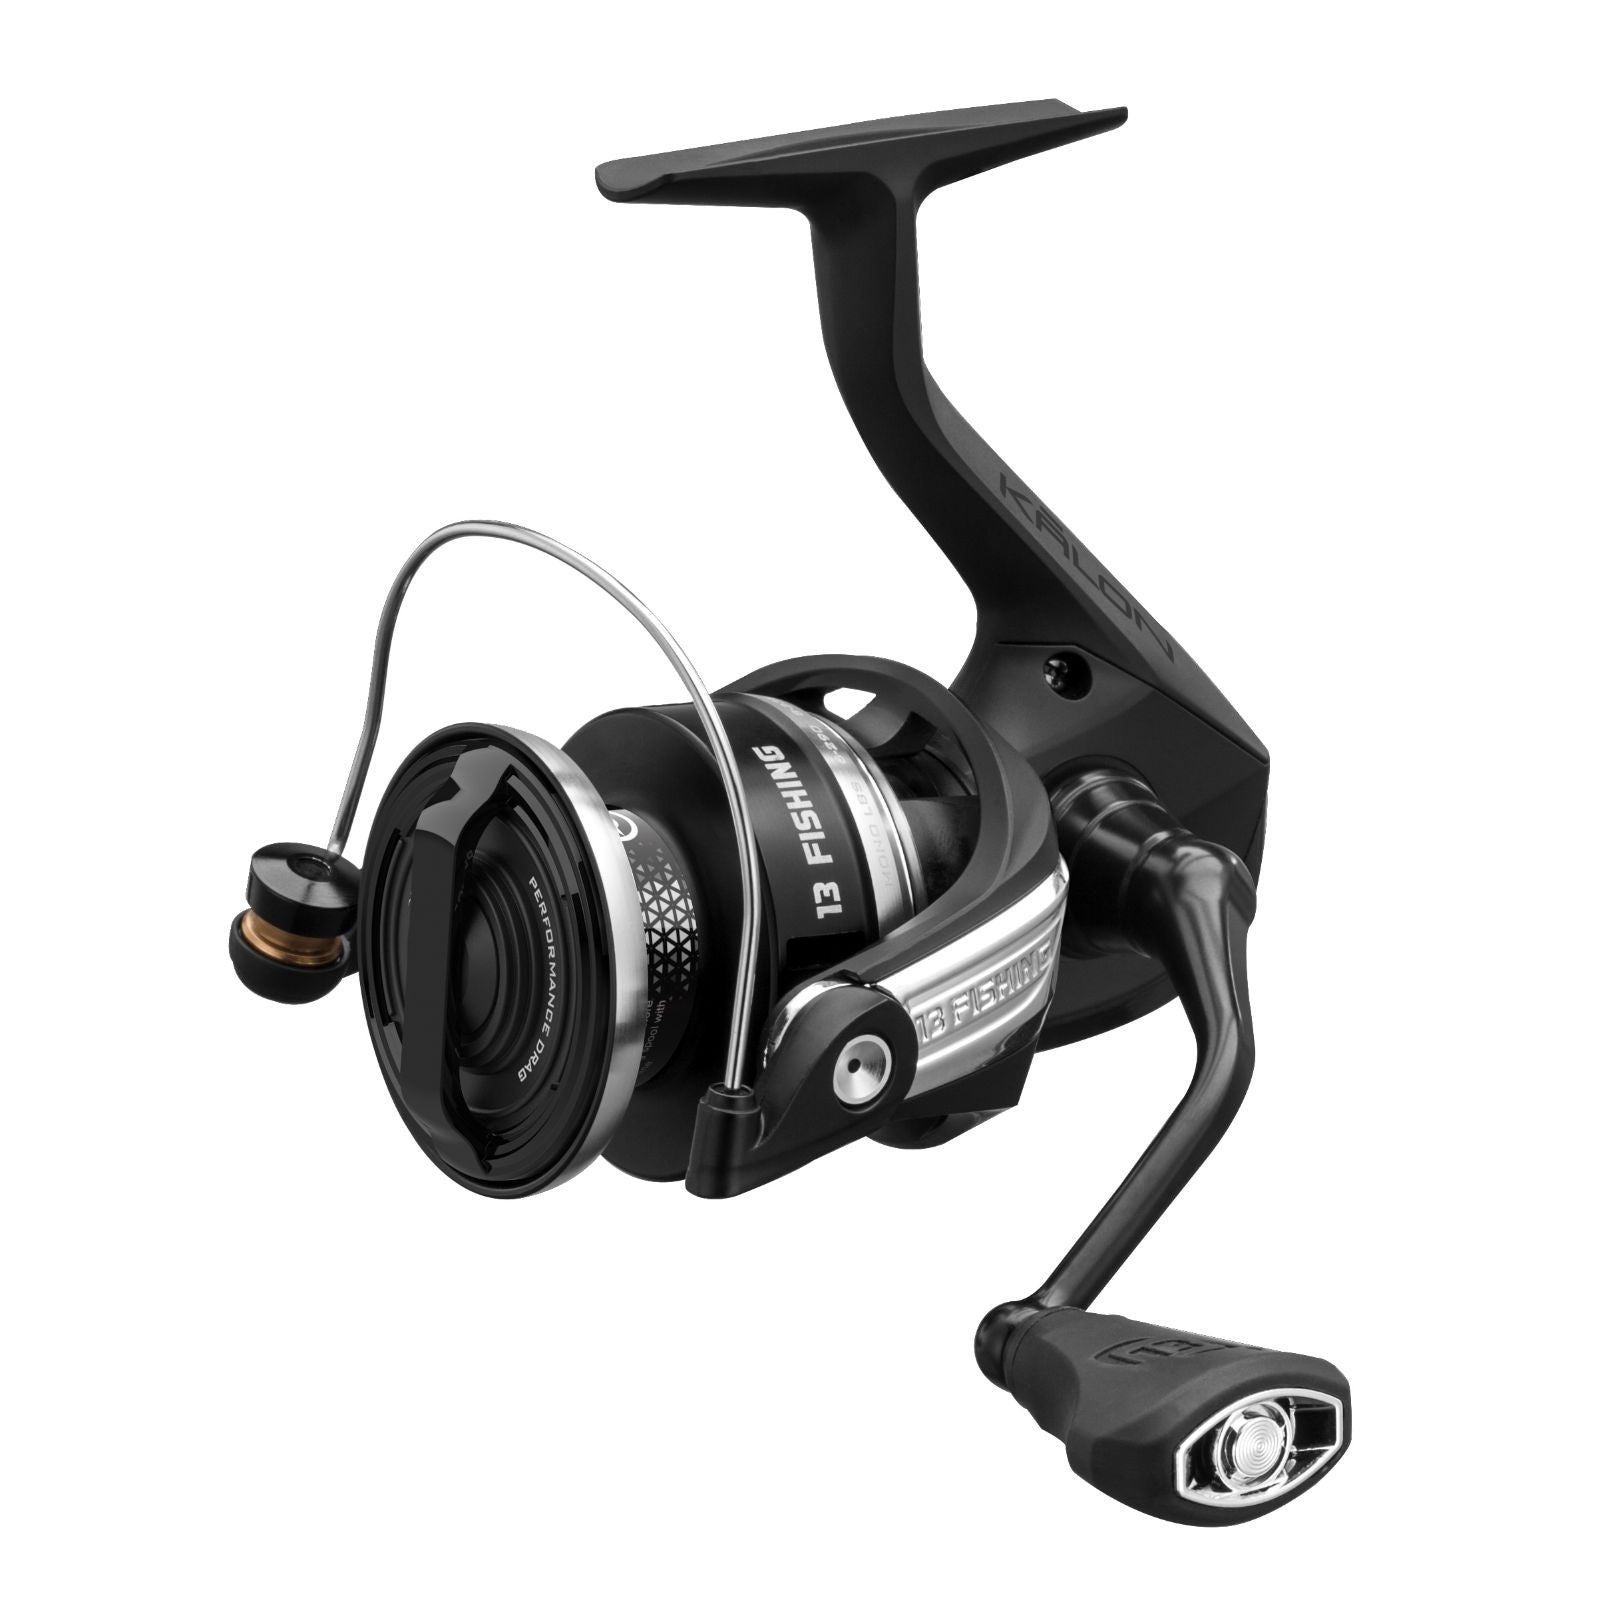 Salt and Fresh 13 Fishing Kalon A Spinning Reel from Fish On Outlet